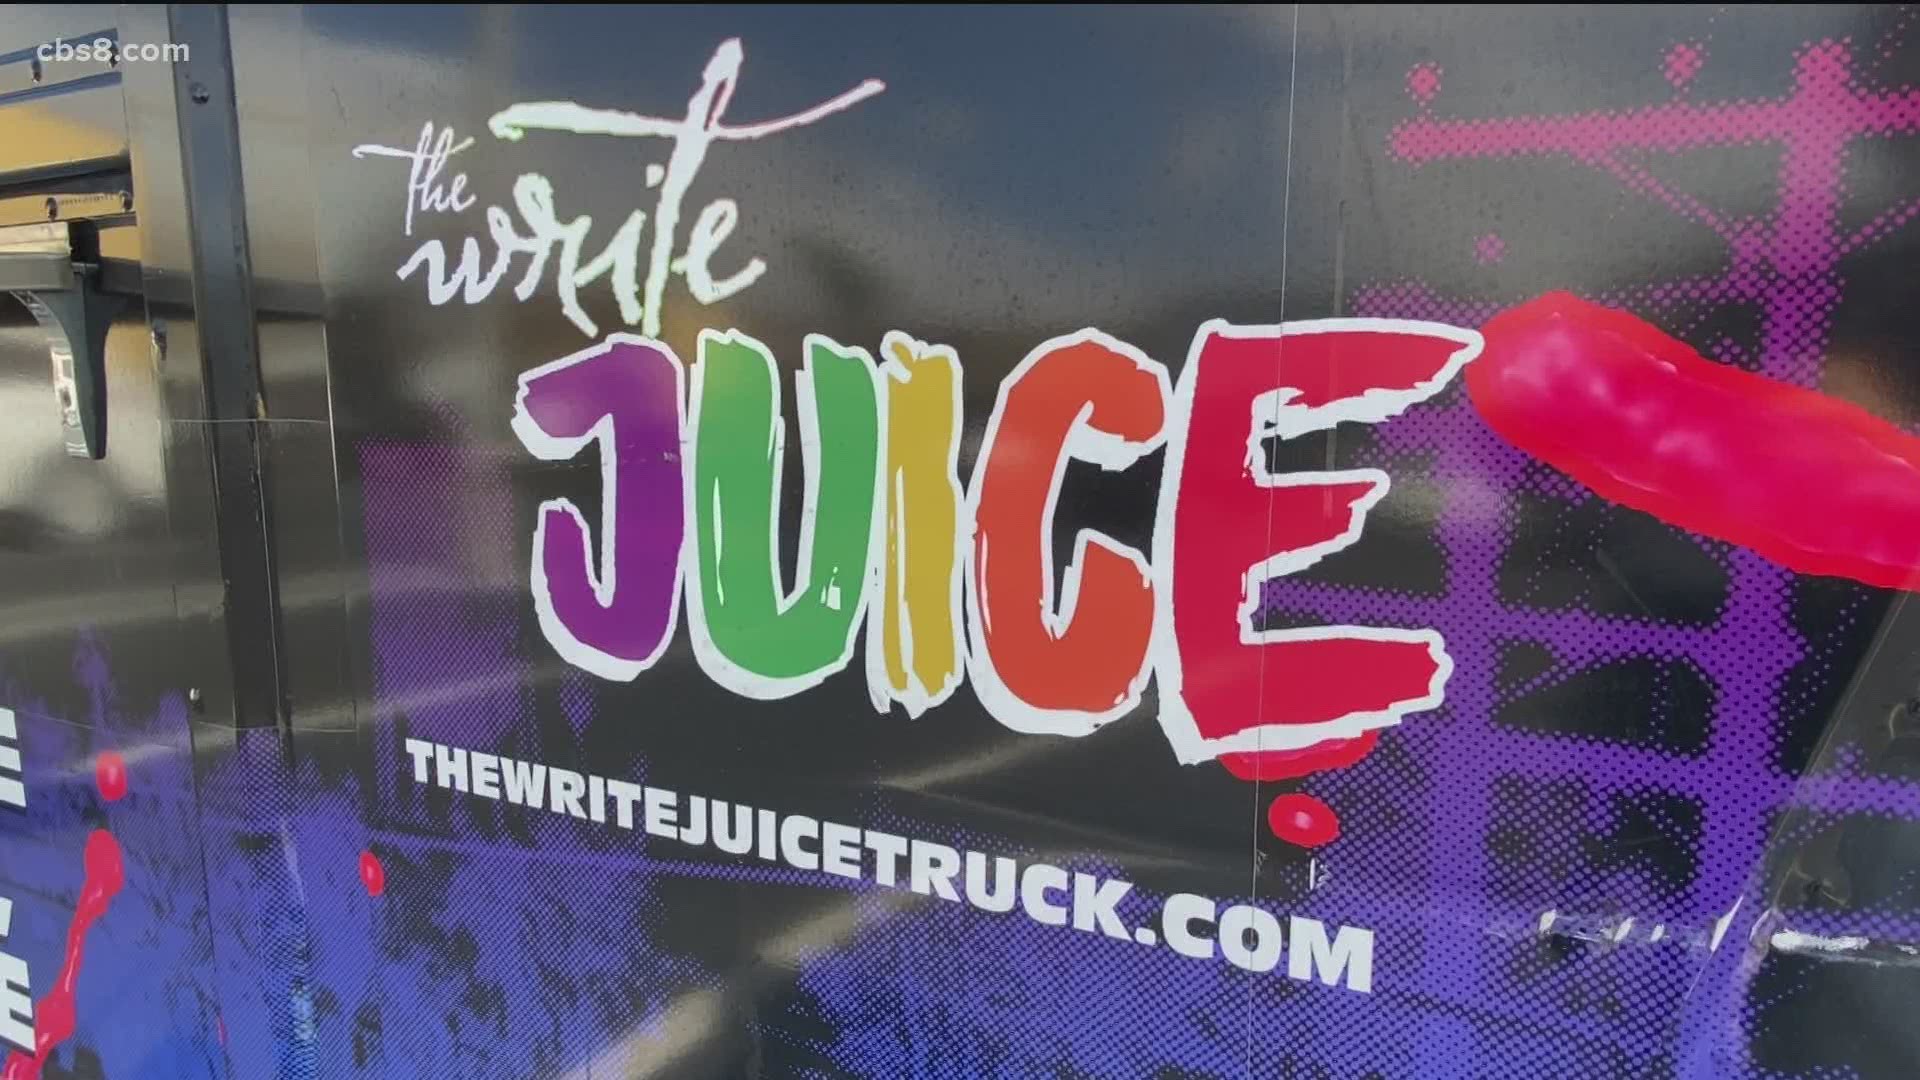 The mobile smoothie truck travels around San Diego and the owner says their mission is to blend health back into the community.